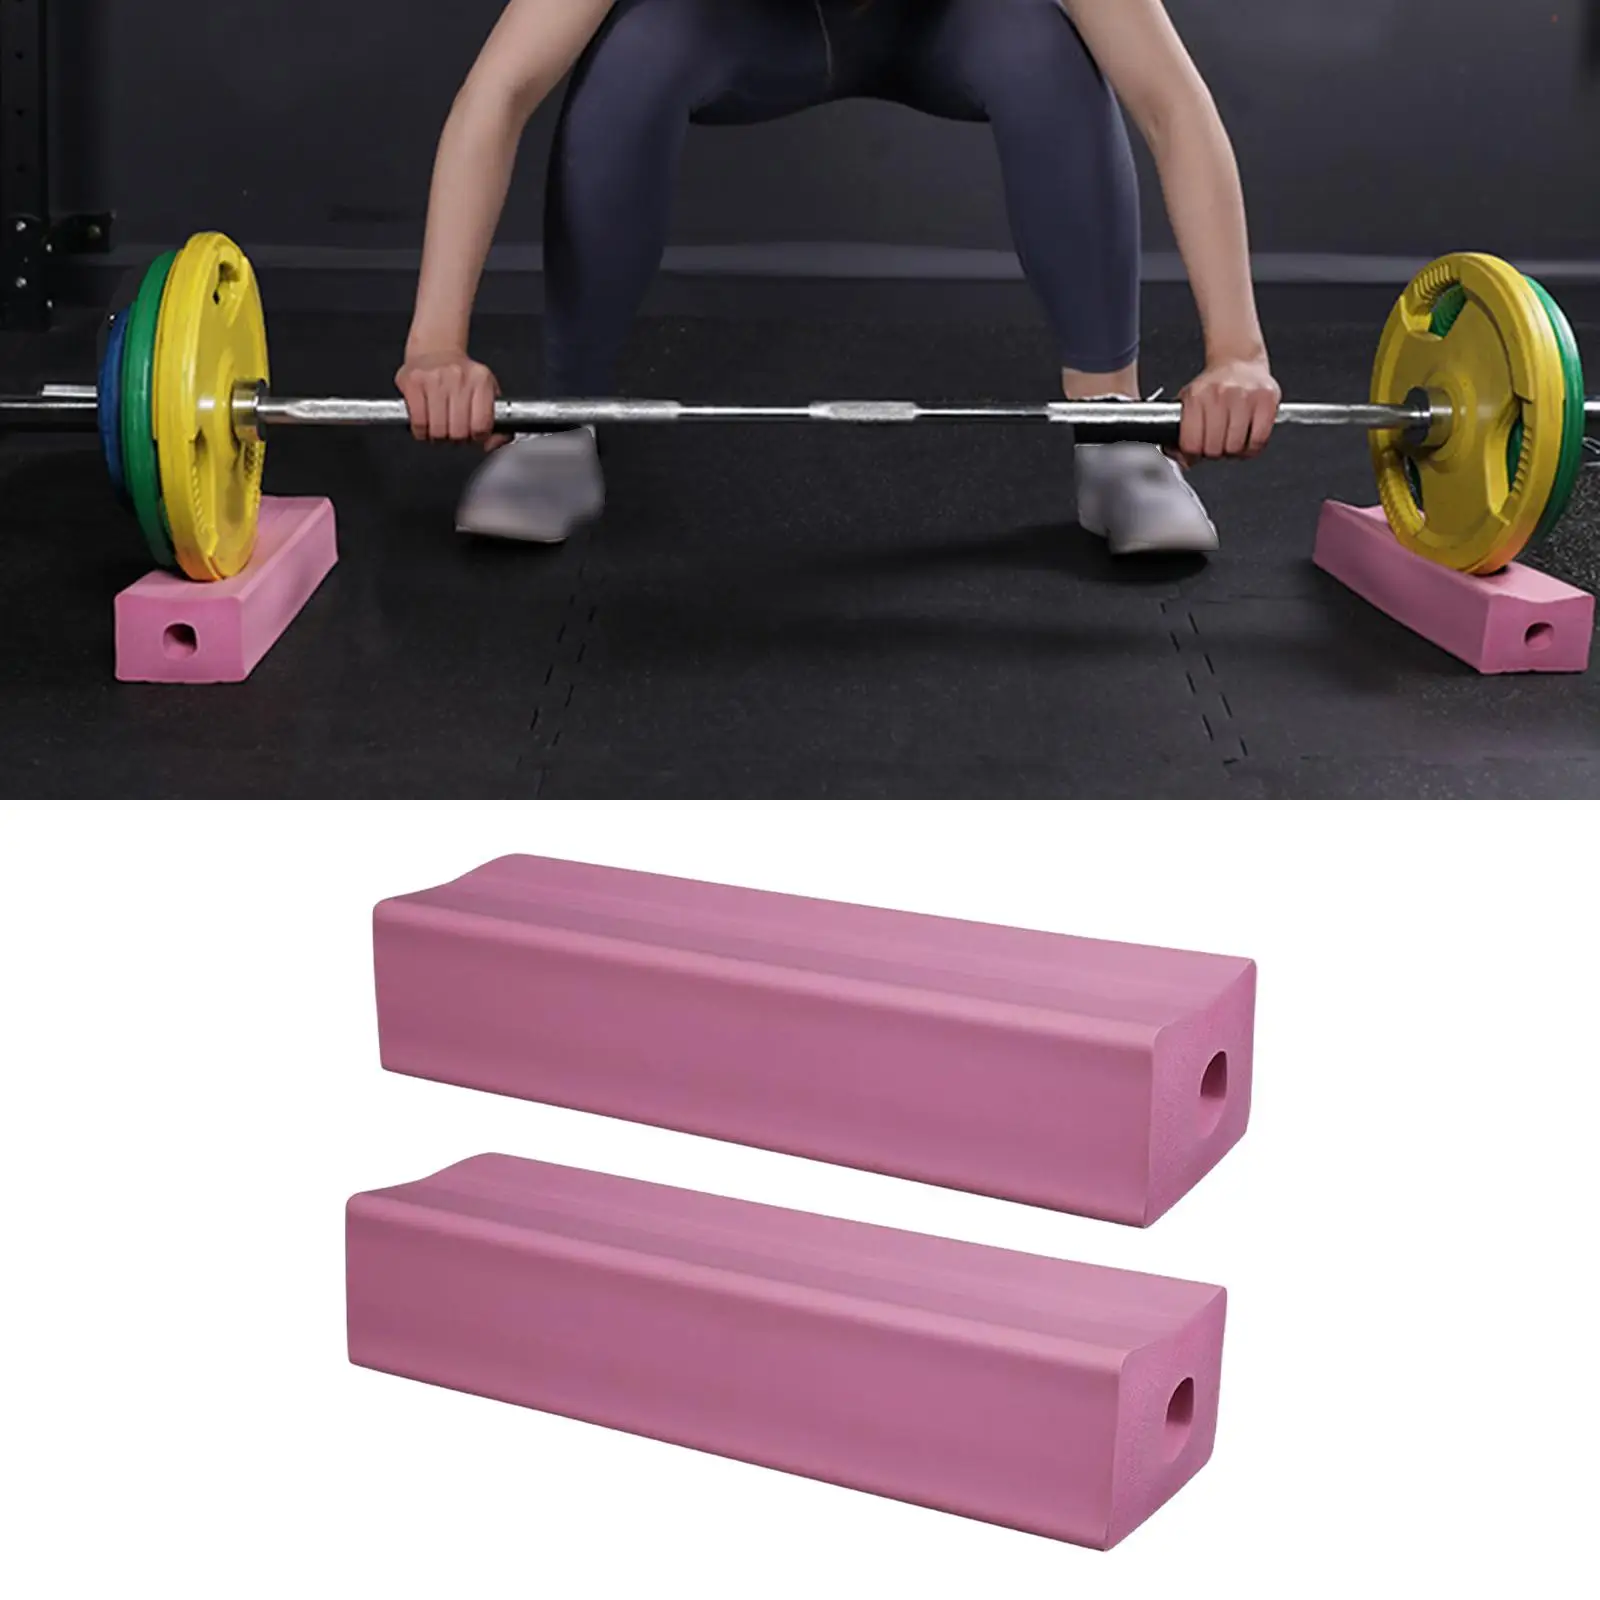 Barbell Crash Pad Groove Design Good Elasticity Thick Weight Lifting Drop Pads for Weight Training Barbell Plates Home Office